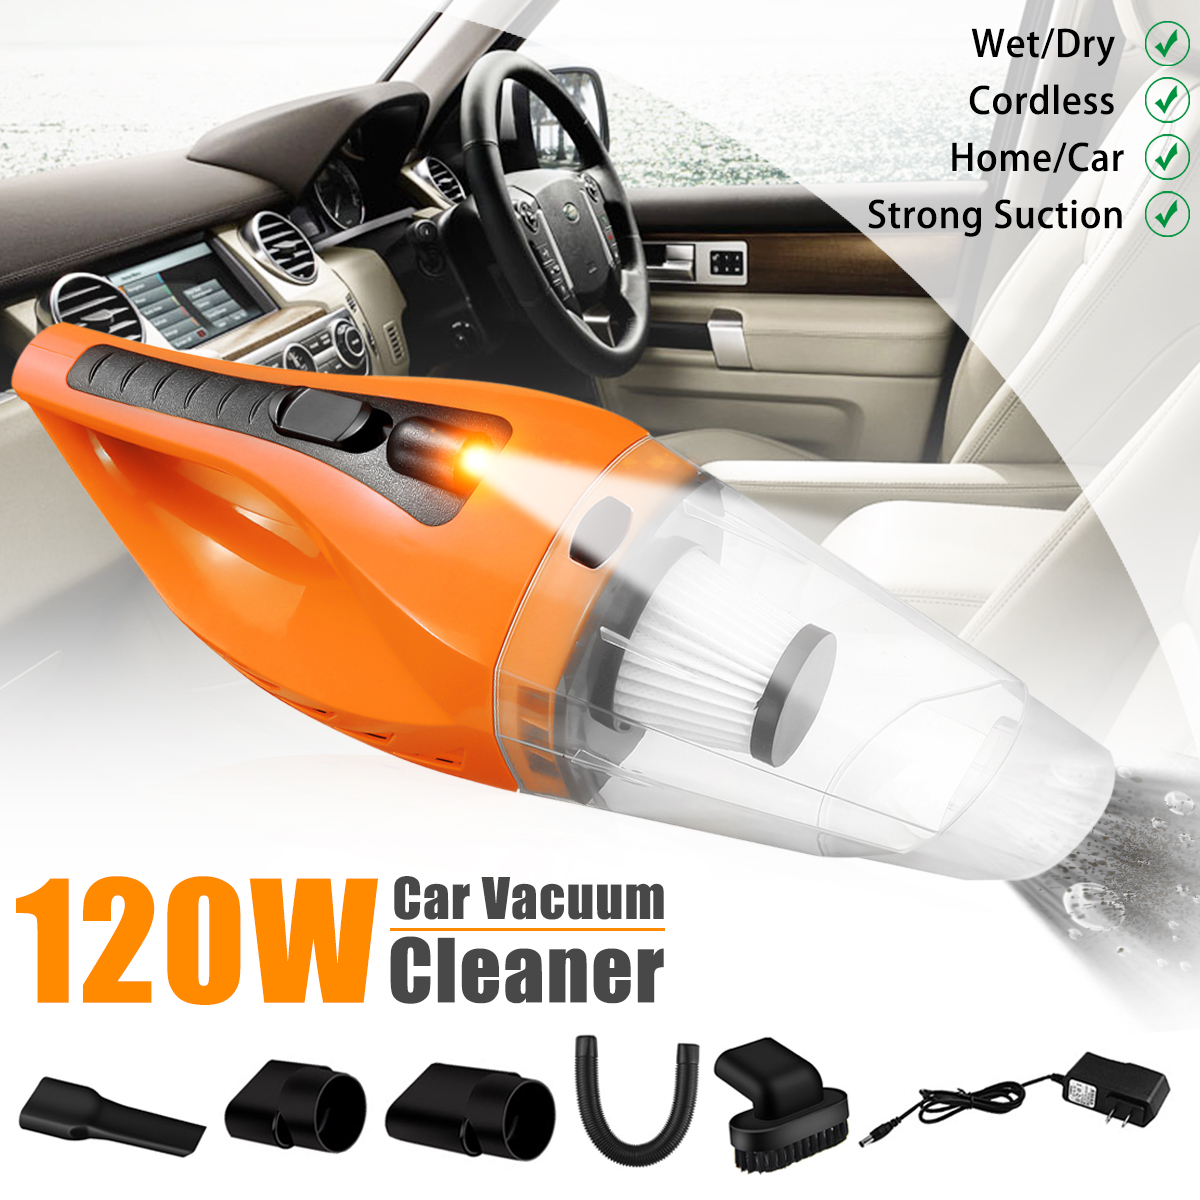 12V-150W-Cordless-Handheld-Vacuum-Cleaner-Strong-Suction-Dust-Busters-Wet--Dry-1423164-2